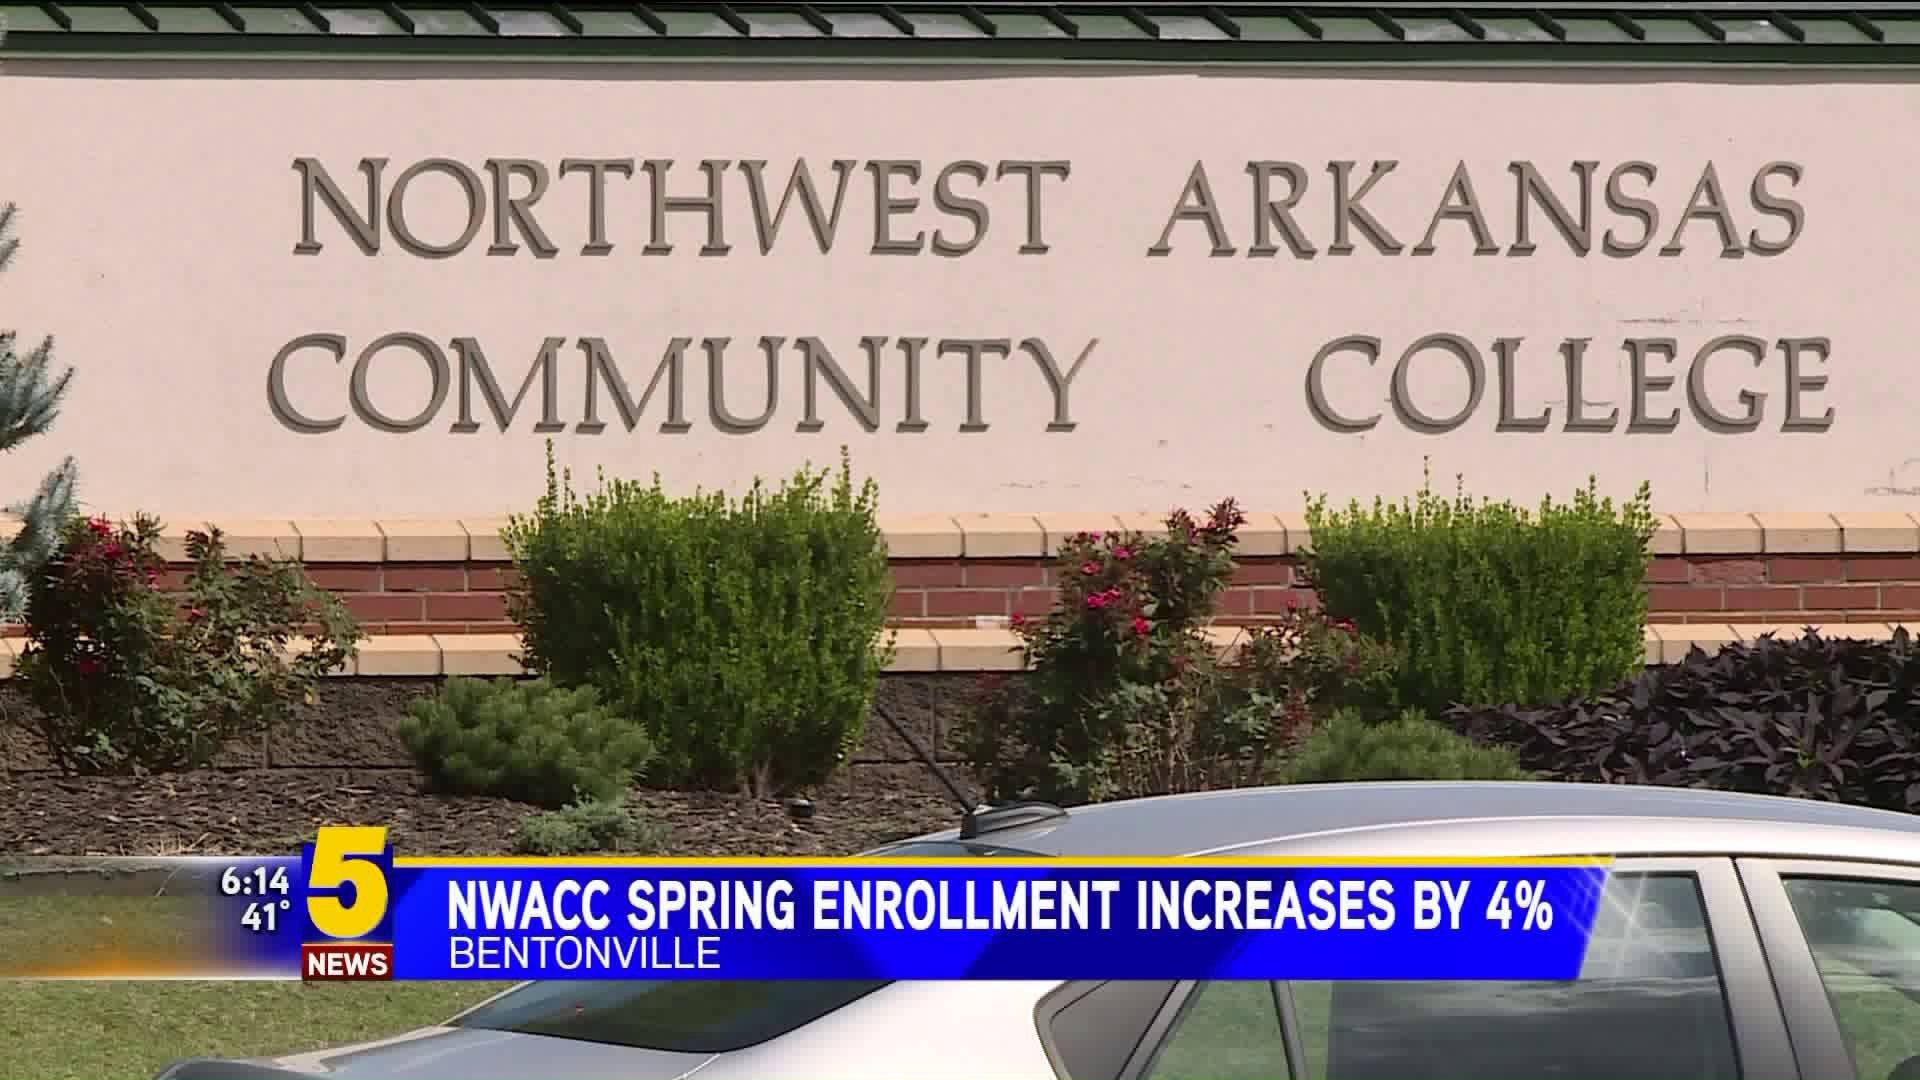 NWACC Spring Enrollment Increased By 4%